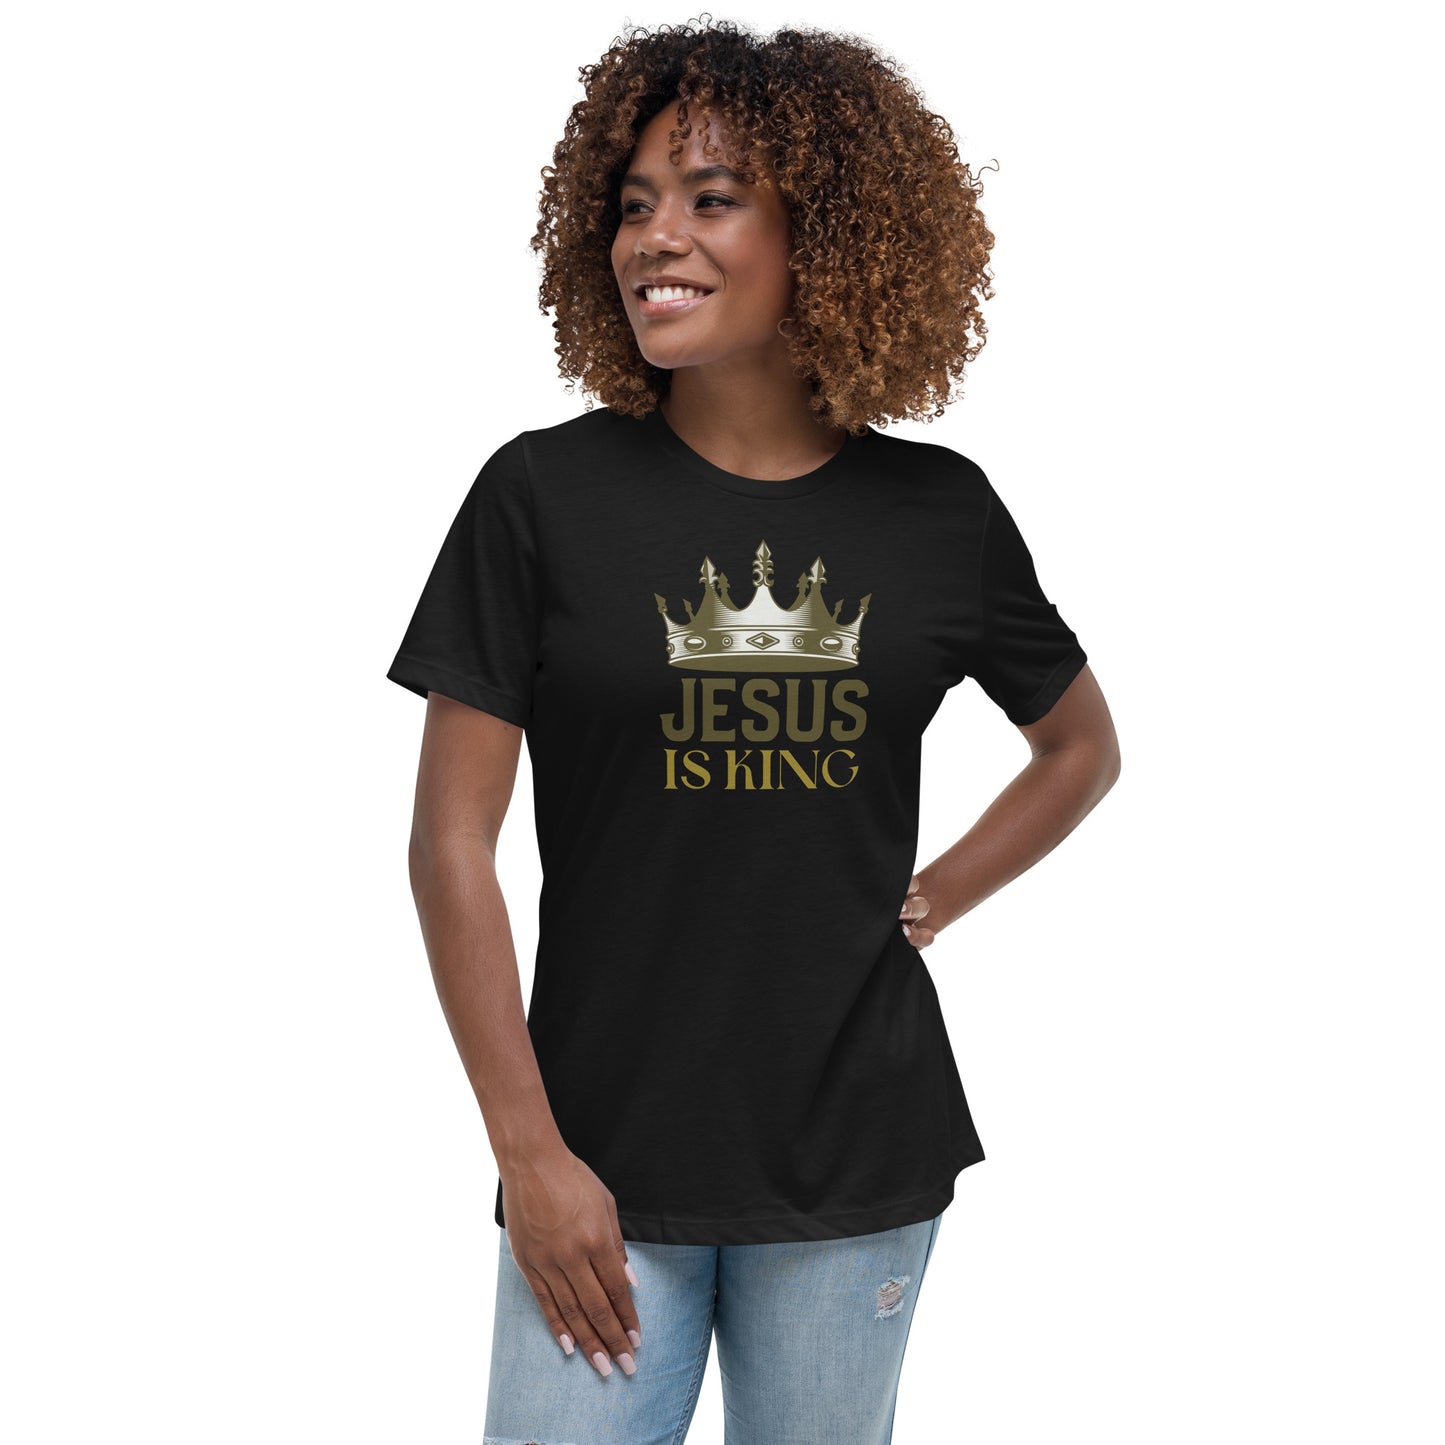 Jesus is KING 2.0 - NEW - Women's Relaxed T-Shirt